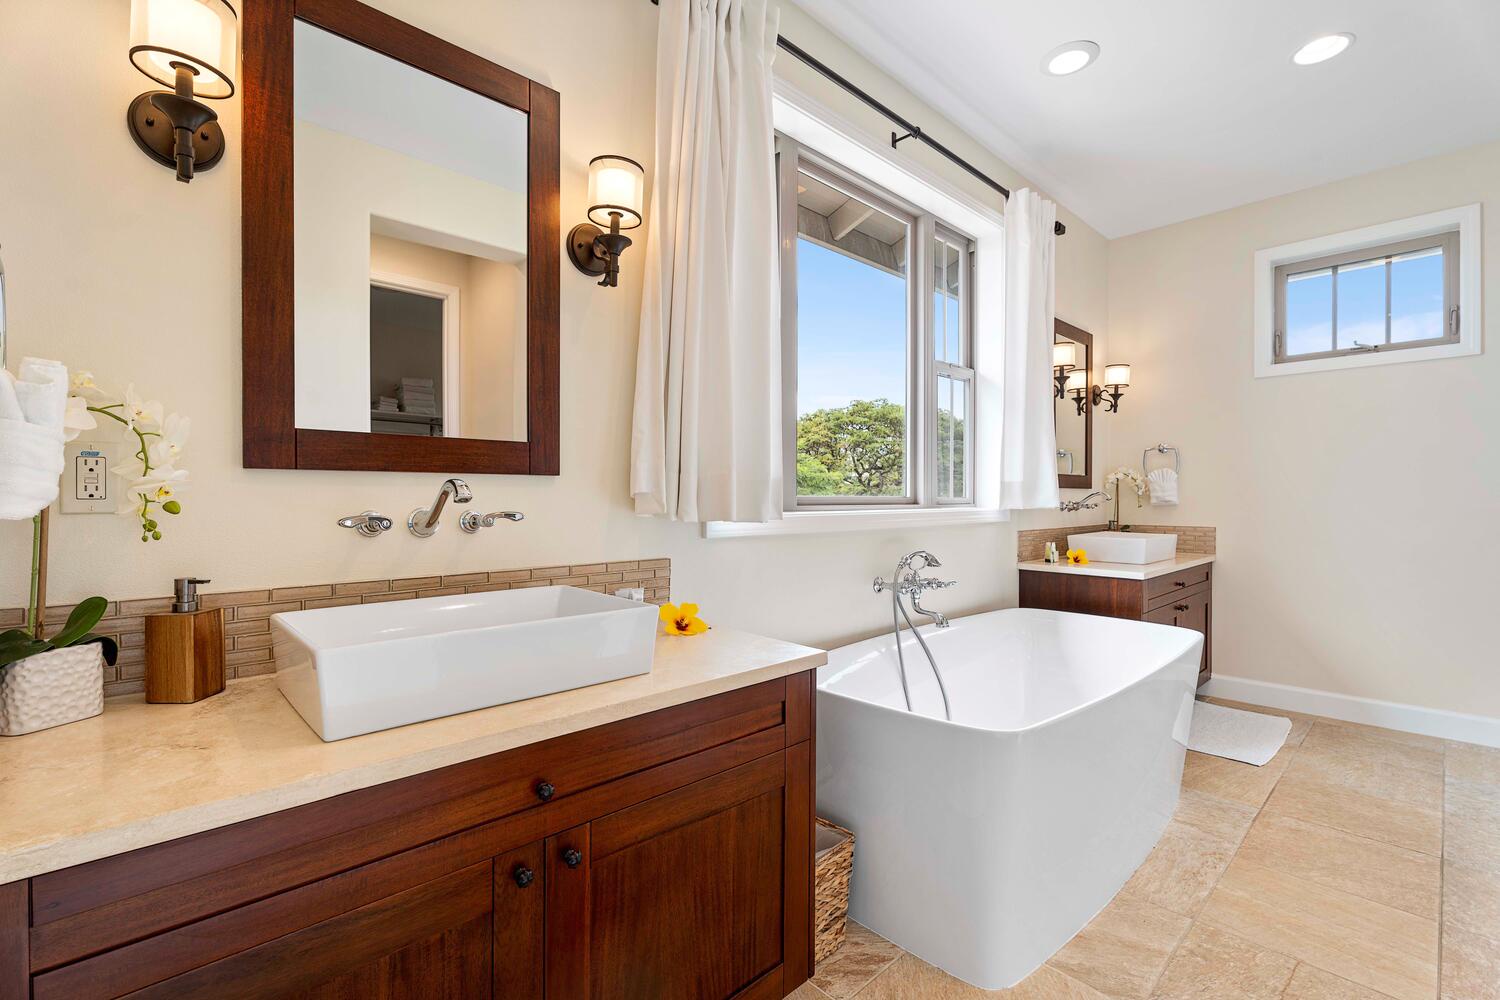 Kailua-Kona Vacation Rentals, Holua Kai #26 - Elegant primary ensuite bathroom with a freestanding tub and rustic wooden accents.